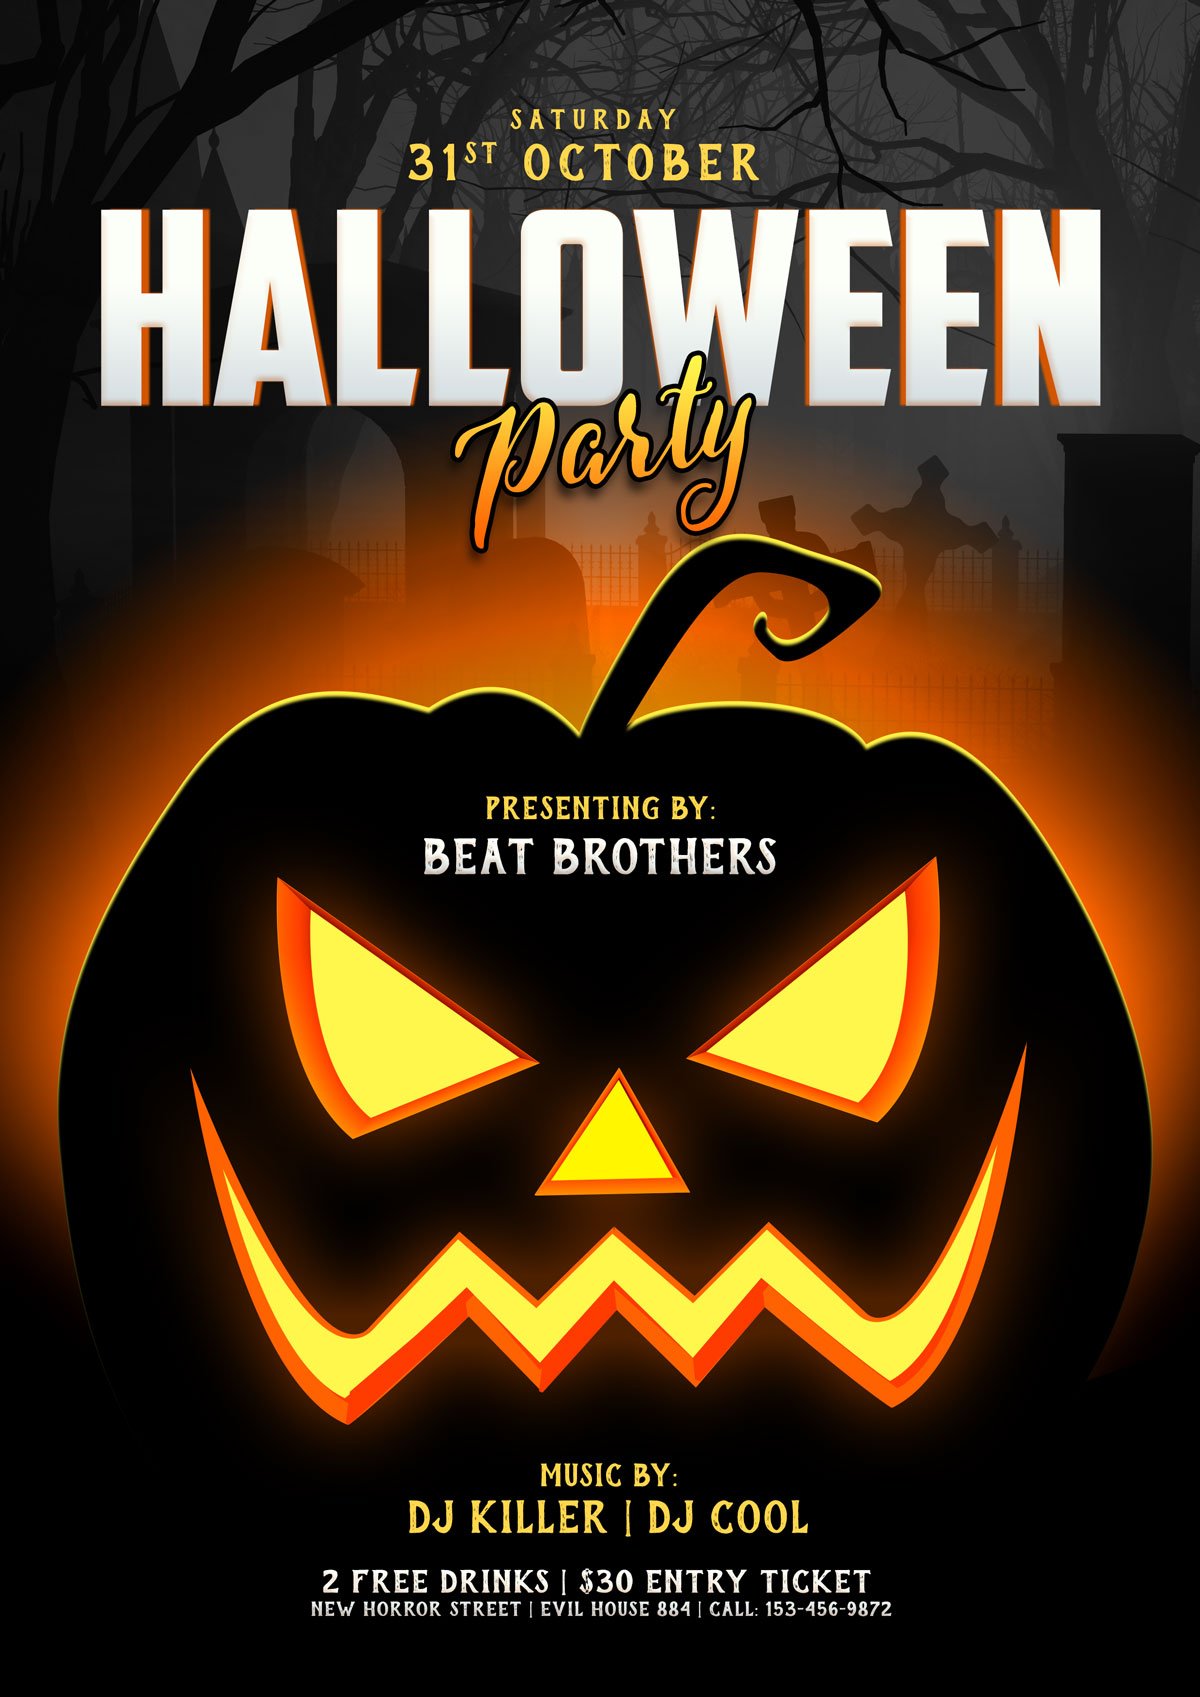 Free Halloween Party Poster / Flyer Design Template PSD